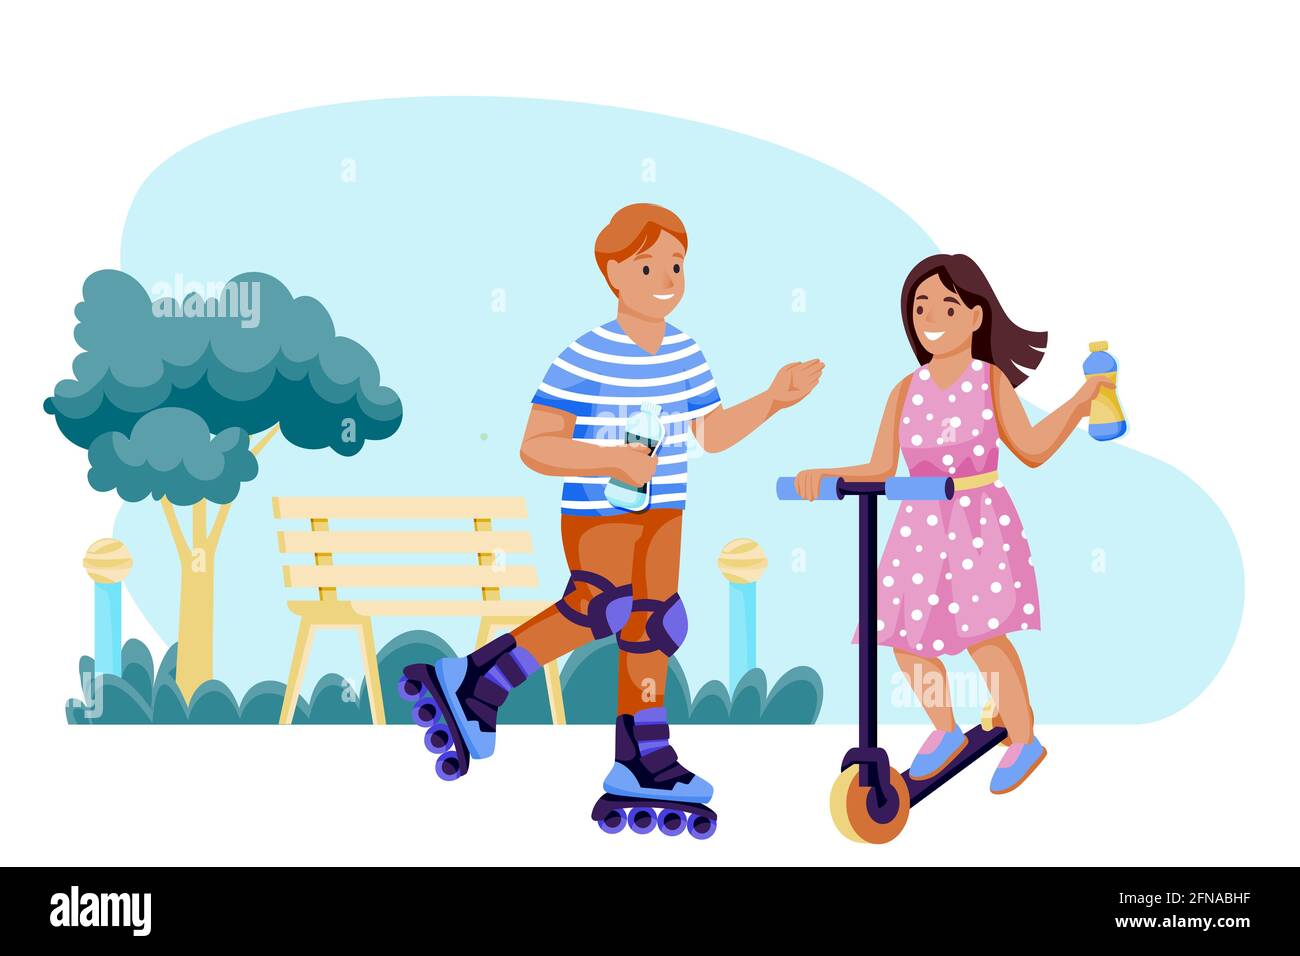 Boy and girl rollerblading and scooter in park and drink water. Vector flat cartoon characters illustration. Happy kids with lemonade bottles in hands Stock Vector